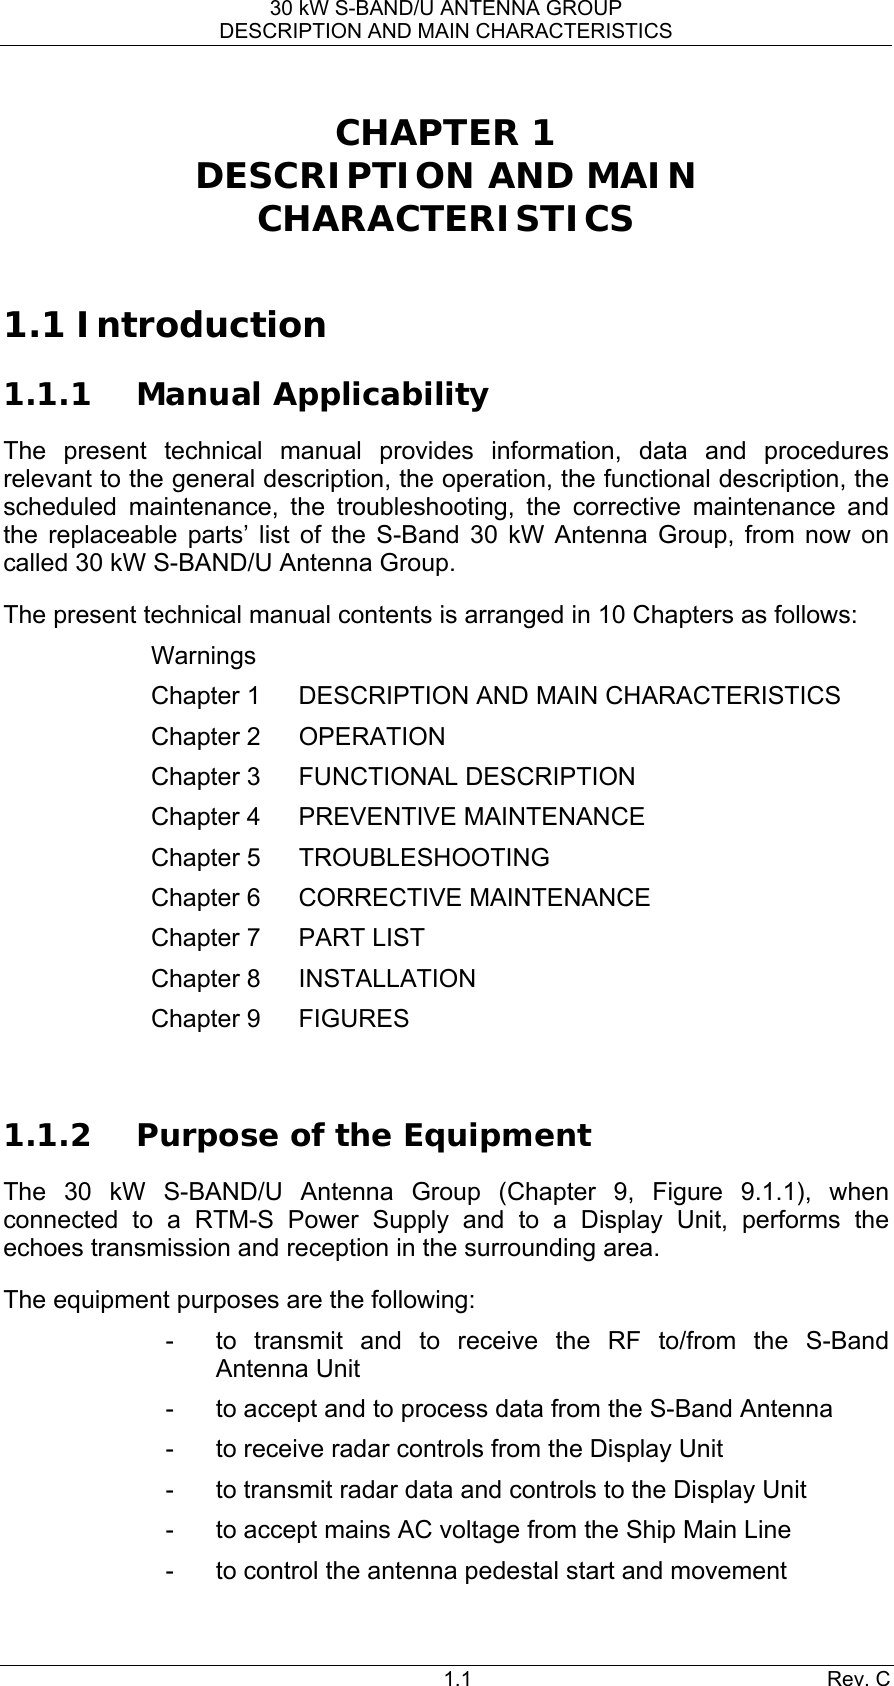 30 kW S-BAND/U ANTENNA GROUP DESCRIPTION AND MAIN CHARACTERISTICS 1.1 Rev. C CHAPTER 1 DESCRIPTION AND MAIN CHARACTERISTICS  1.1 Introduction 1.1.1 Manual Applicability The present technical manual provides information, data and procedures relevant to the general description, the operation, the functional description, the scheduled maintenance, the troubleshooting, the corrective maintenance and the replaceable parts’ list of the S-Band 30 kW Antenna Group, from now on called 30 kW S-BAND/U Antenna Group.  The present technical manual contents is arranged in 10 Chapters as follows: Warnings Chapter 1  DESCRIPTION AND MAIN CHARACTERISTICS Chapter 2  OPERATION Chapter 3  FUNCTIONAL DESCRIPTION Chapter 4  PREVENTIVE MAINTENANCE Chapter 5  TROUBLESHOOTING Chapter 6  CORRECTIVE MAINTENANCE Chapter 7  PART LIST Chapter 8  INSTALLATION Chapter 9  FIGURES  1.1.2 Purpose of the Equipment The 30 kW S-BAND/U Antenna Group (Chapter 9, Figure 9.1.1), when connected to a RTM-S Power Supply and to a Display Unit, performs the echoes transmission and reception in the surrounding area. The equipment purposes are the following: -  to transmit and to receive the RF to/from the S-Band Antenna Unit -  to accept and to process data from the S-Band Antenna -  to receive radar controls from the Display Unit -  to transmit radar data and controls to the Display Unit -  to accept mains AC voltage from the Ship Main Line -  to control the antenna pedestal start and movement 